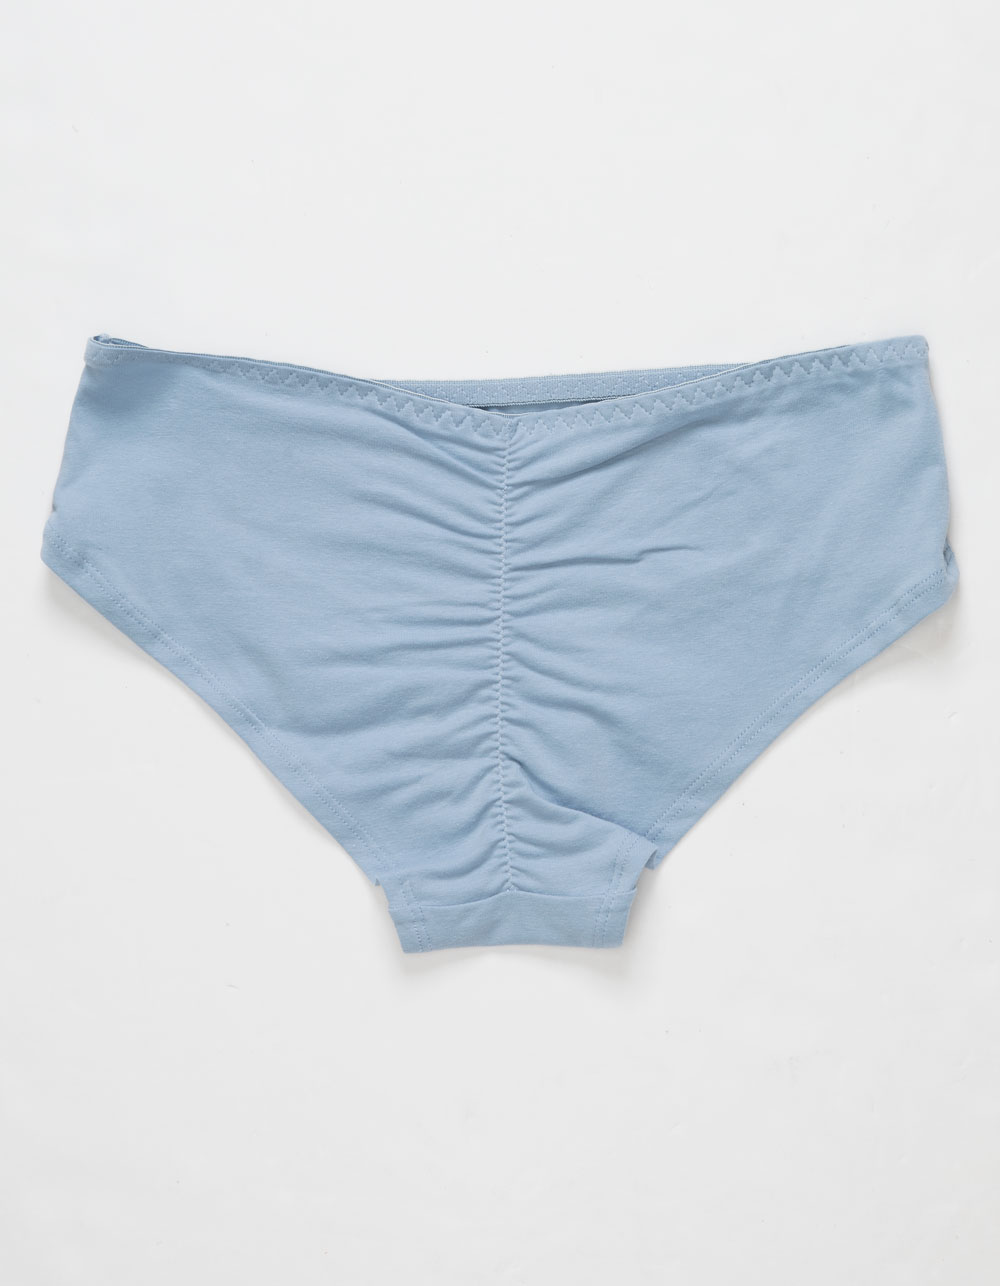 LOVE LIBBY Lace Sides Cheeky Panties - LIGHT BLUE | Tillys